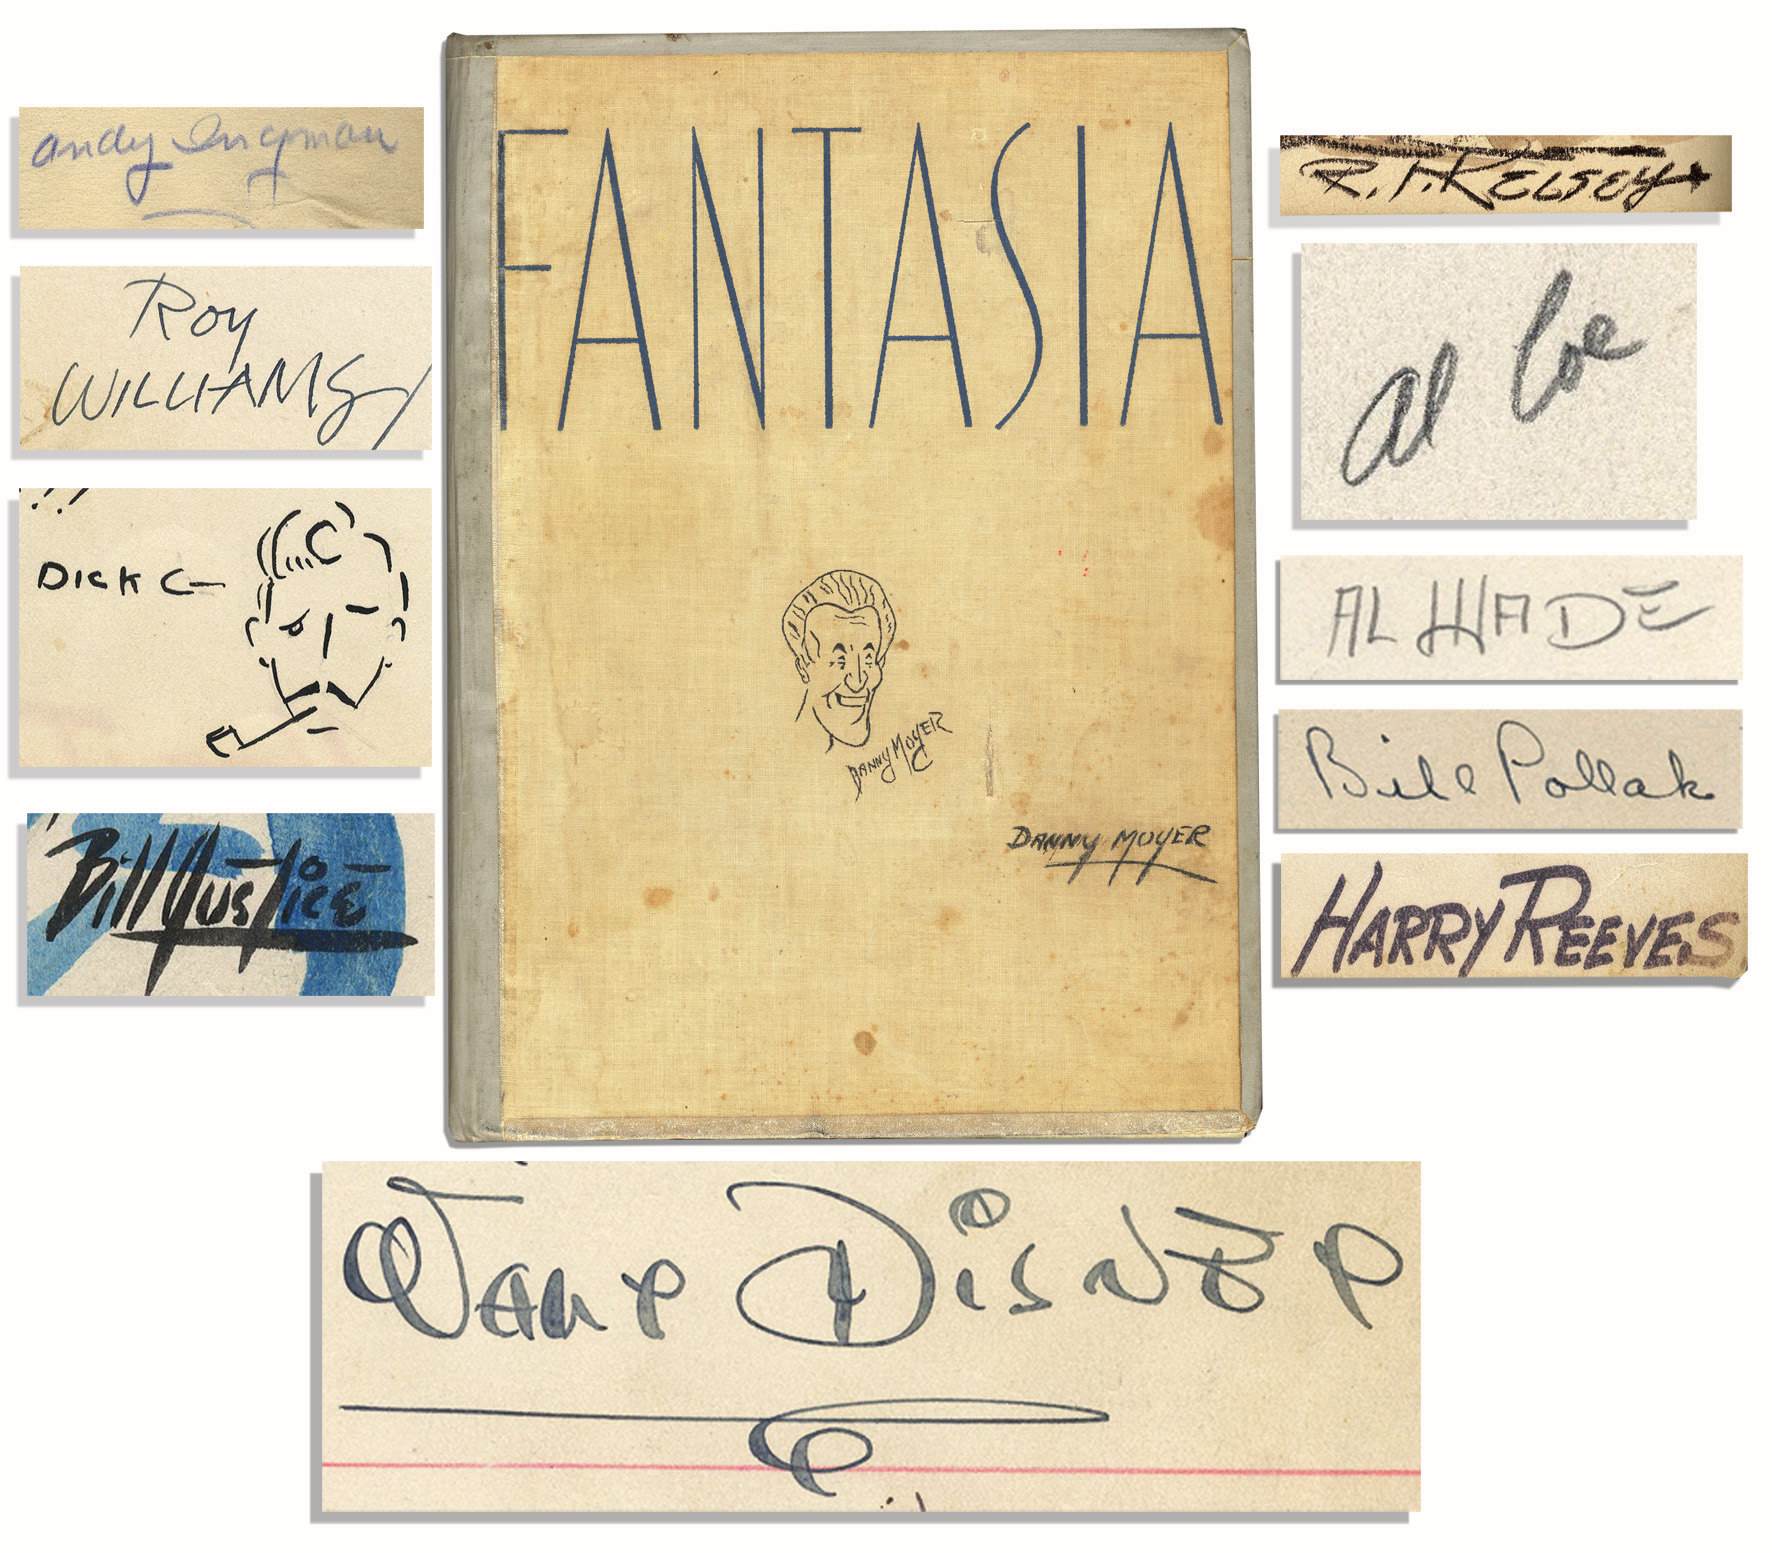 Walt Disney Autograph Fantastic Copy of ''Fantasia'' Signed by Walt Disney -- Beautiful, Oversized Book Signed by the Preeminent Animator -- With Various Personalized Illustrations & Art By Disney Illustrators